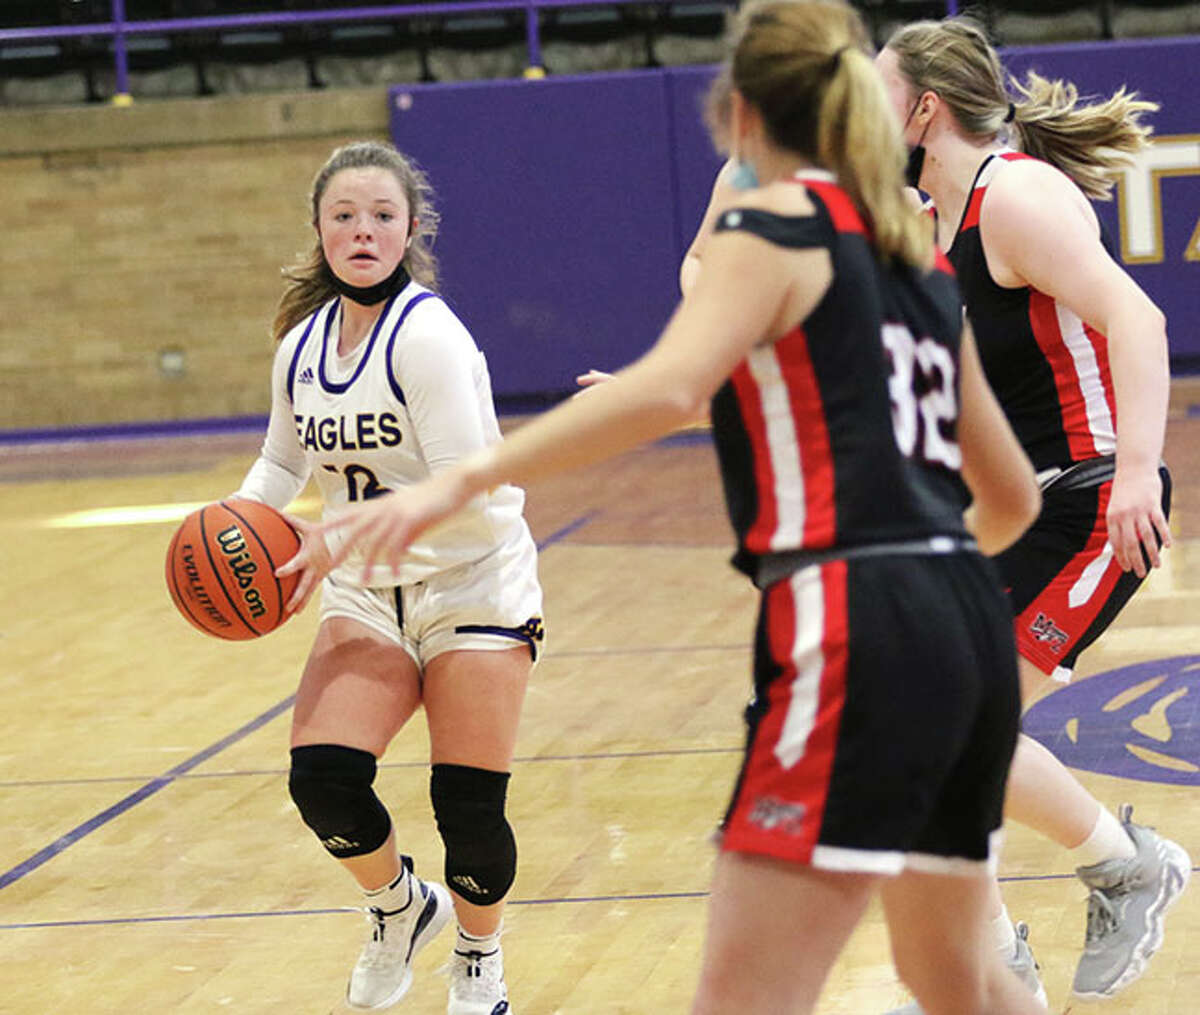 CM's Aubree Wallace (left), shown delivering a pass in a game last Saturday against Mount Zion at the Taylorville Tourney, had eight rebounds and eight assists Friday night in the Eagles' tourney win over Hillsboro.